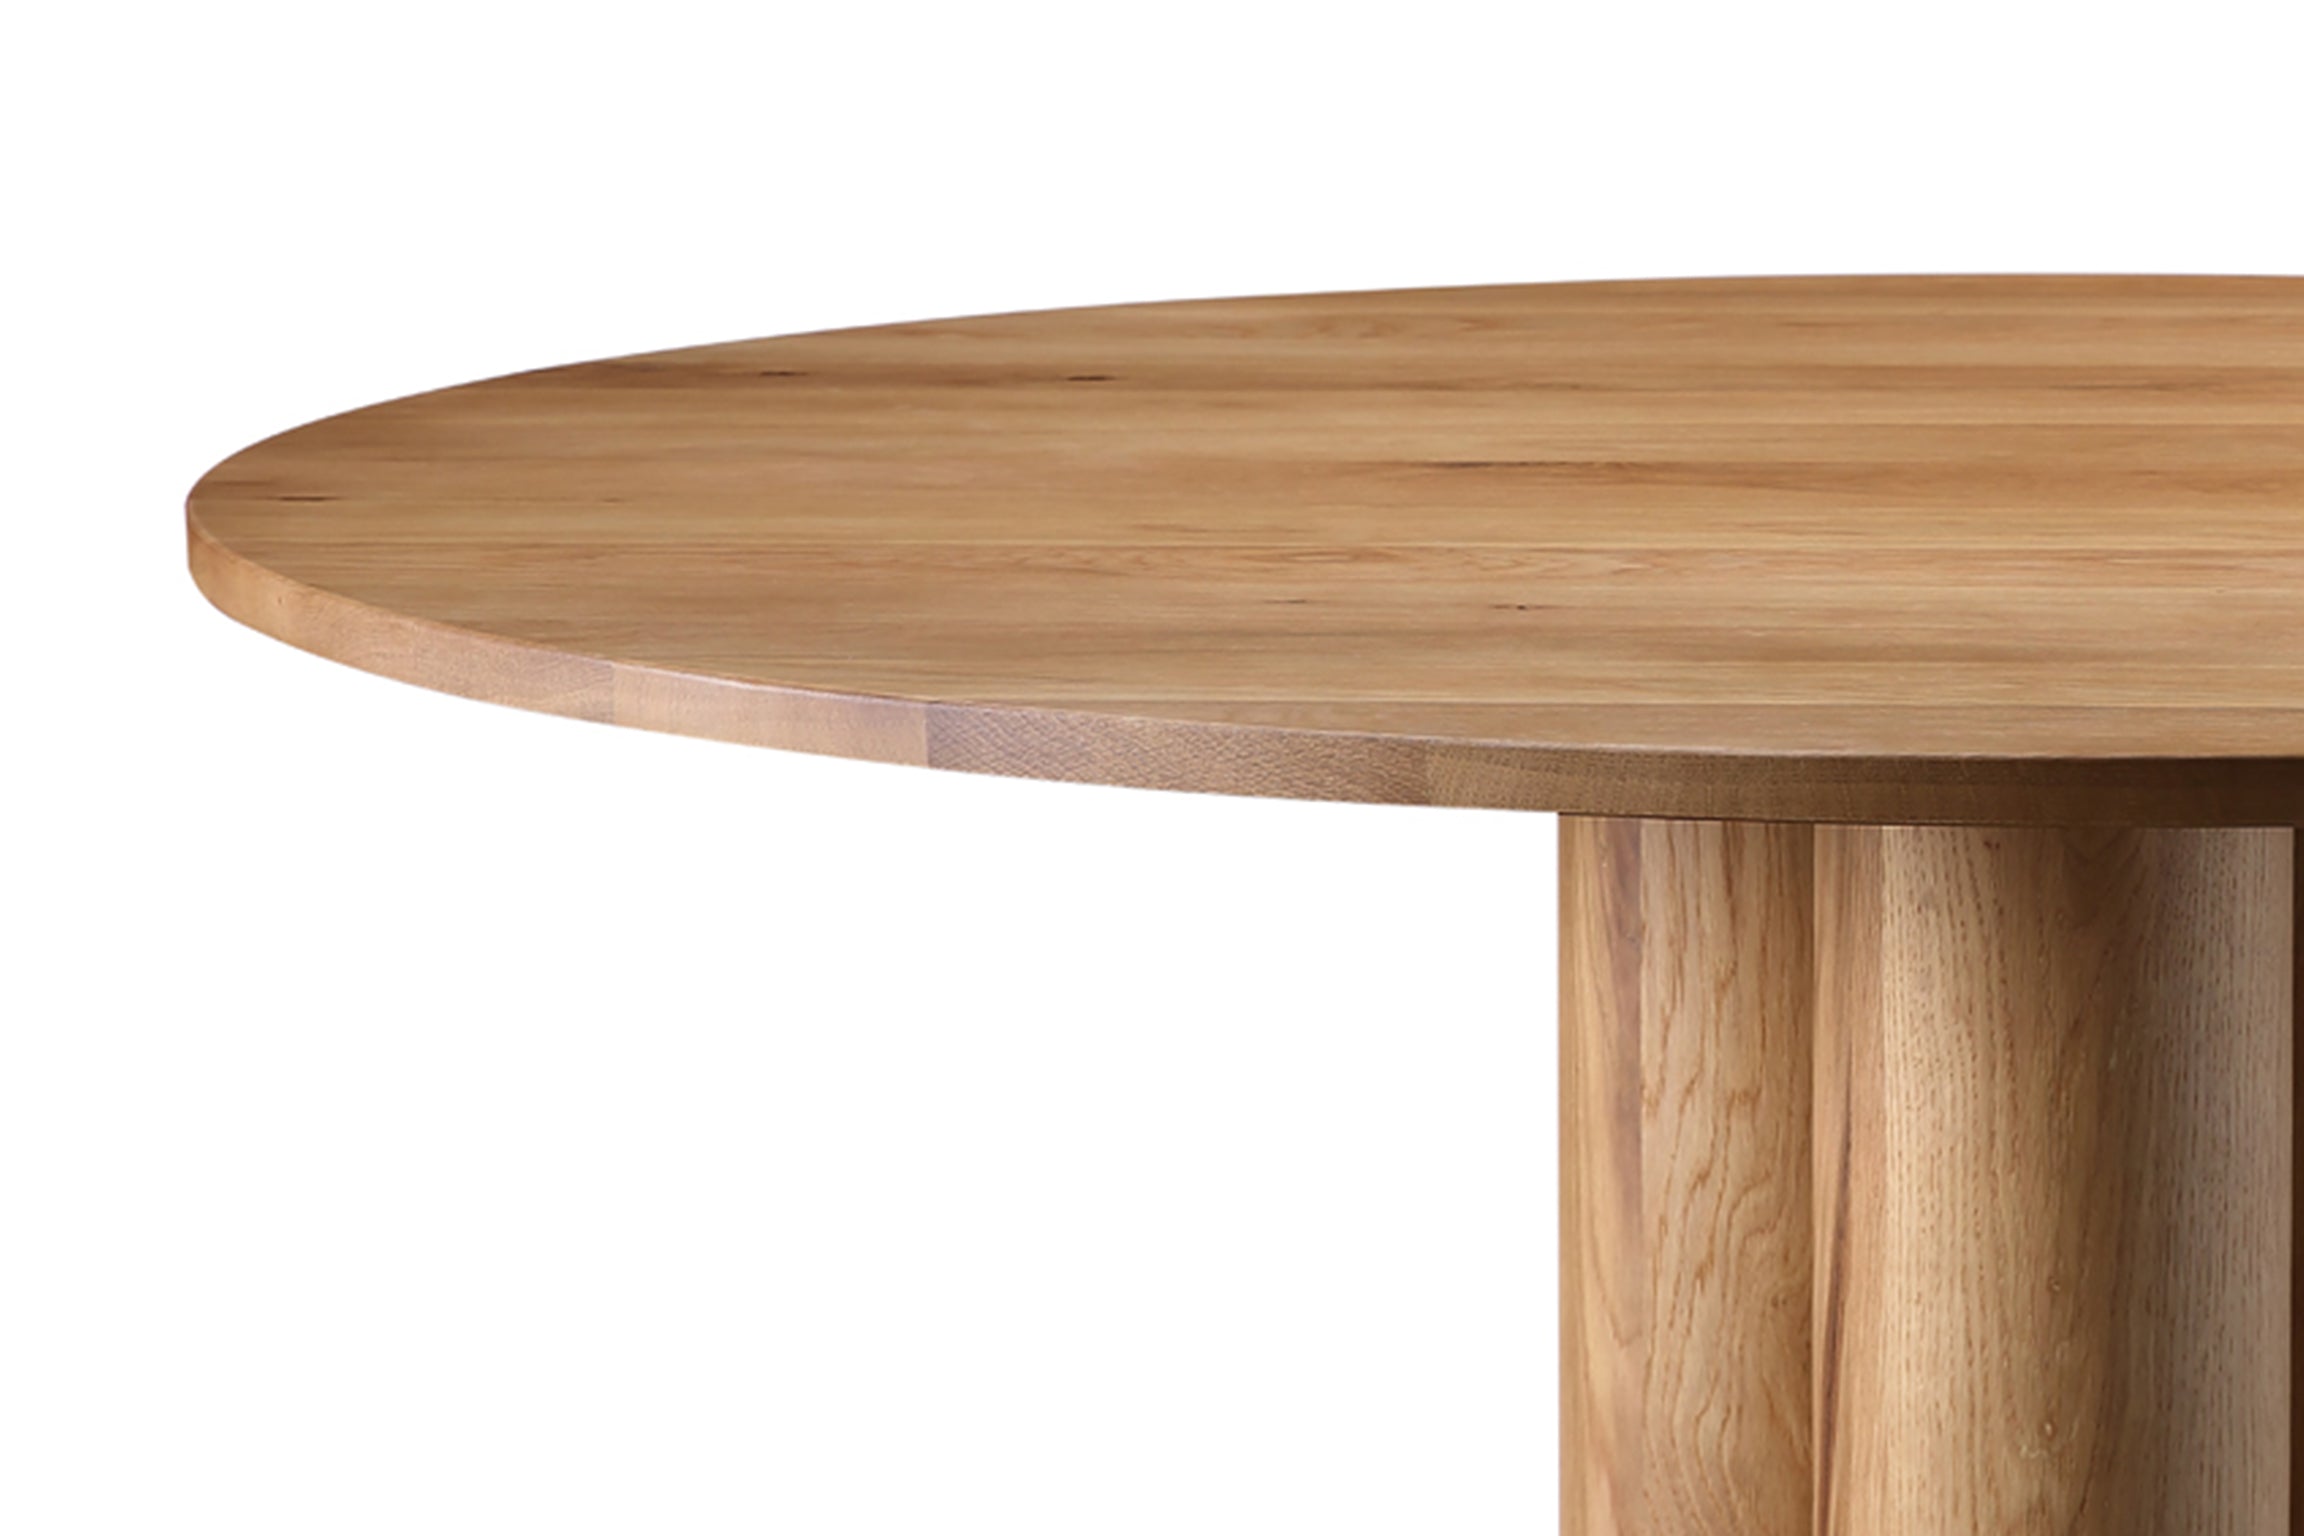 Formation Dining Table, Seats 4-5 People, White Oak - Image 3